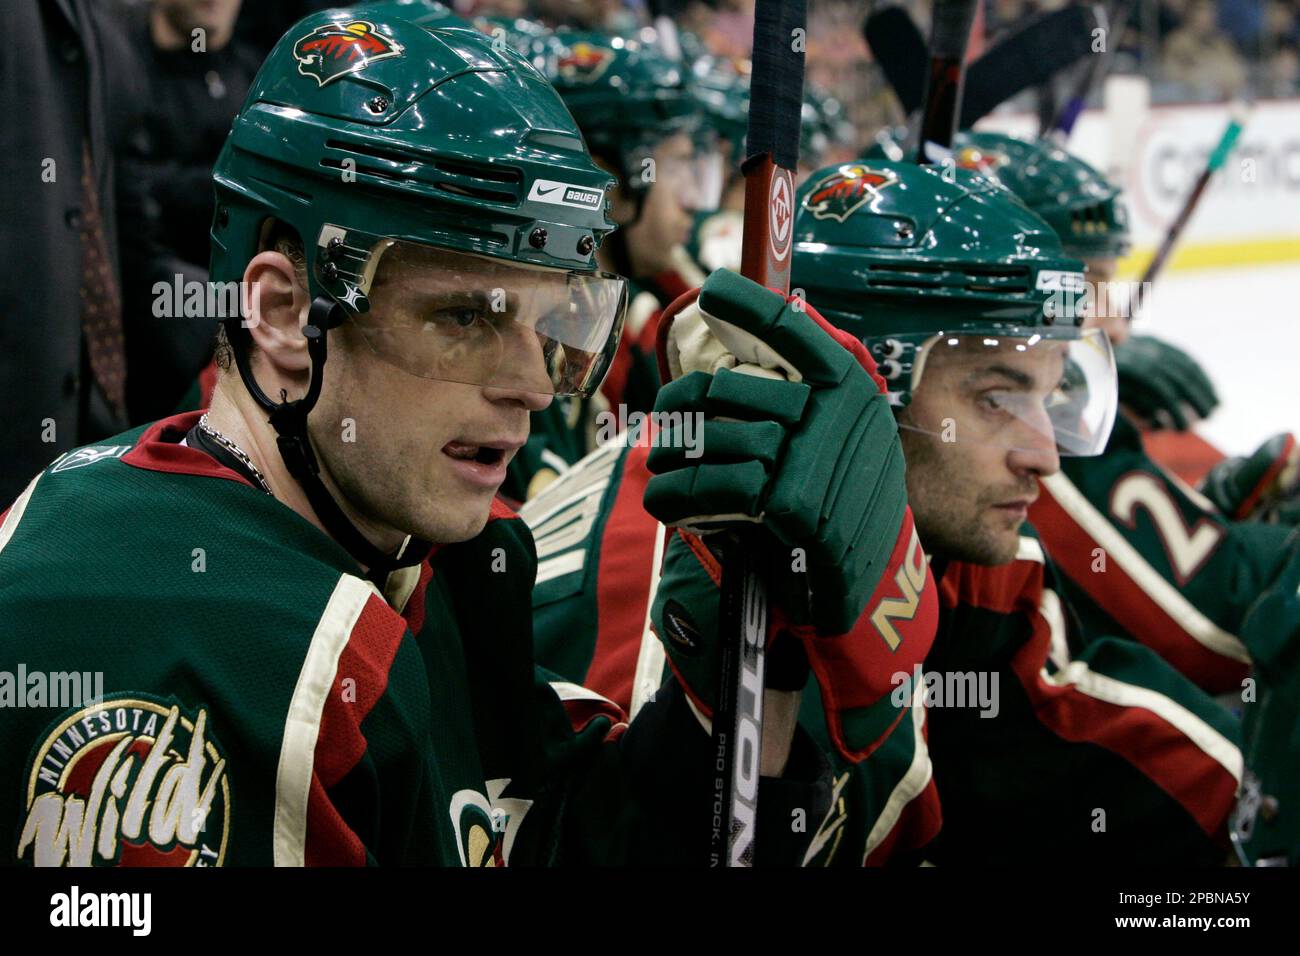 Minnesota Wild right wing Marian Gaborik, left, of Slovakia, and teammate Pavol Demitra, right, of Slovakia, watch from the bench during the third period of an NHL hockey game against the Edmonton